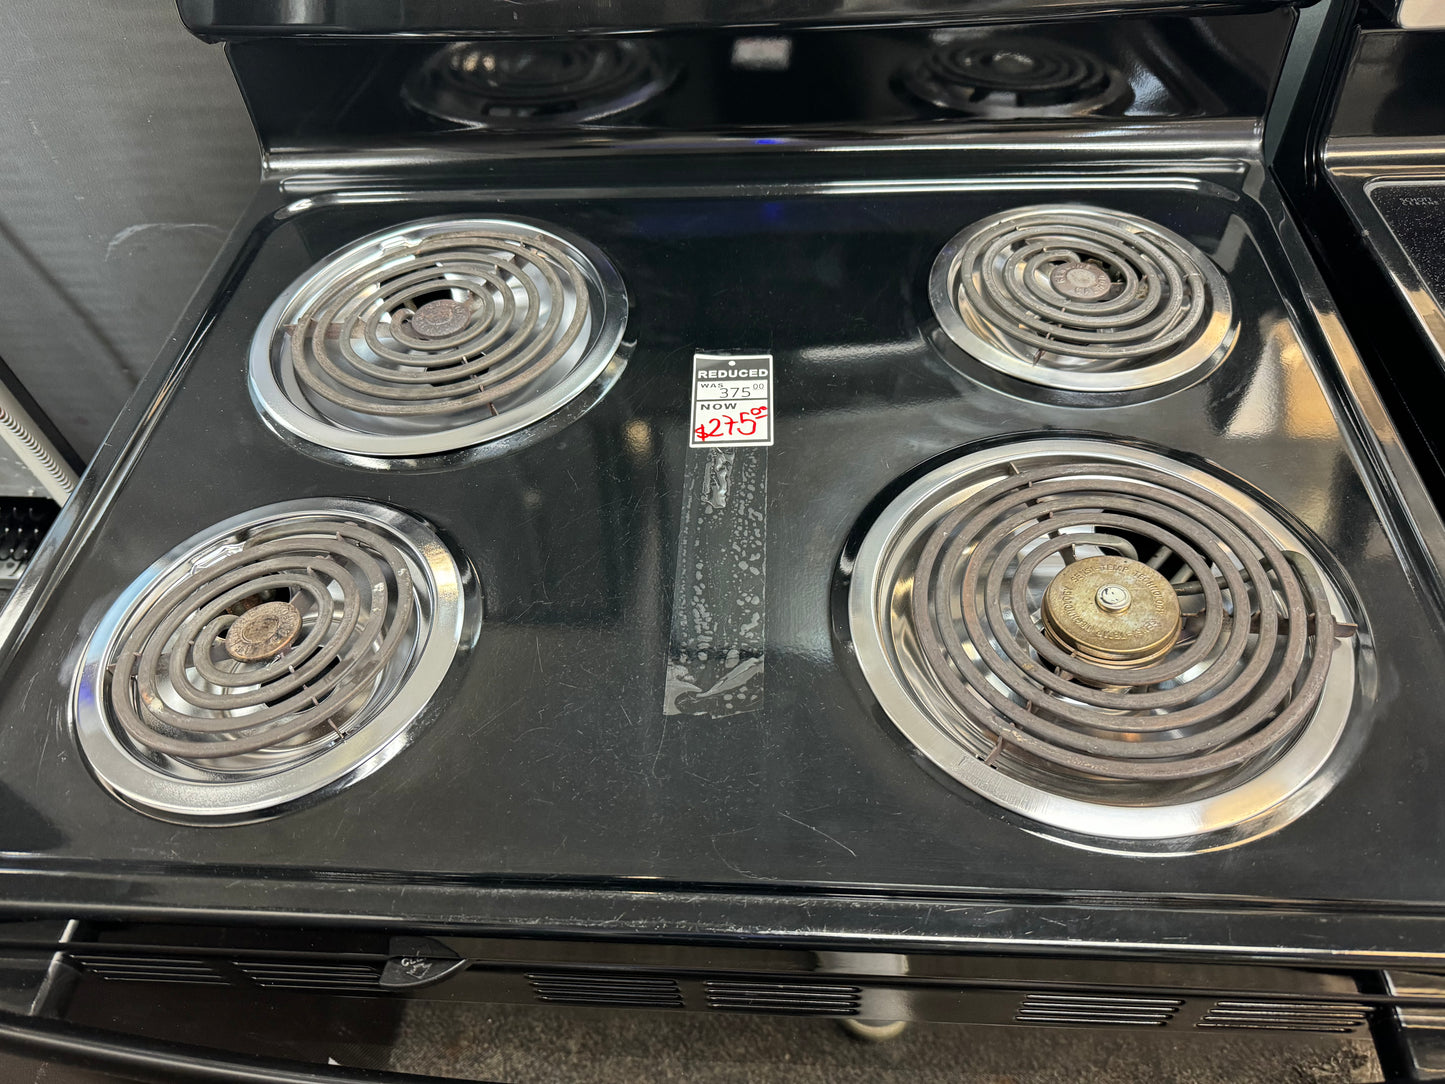 GE black electric range coil 30” inch electric stove